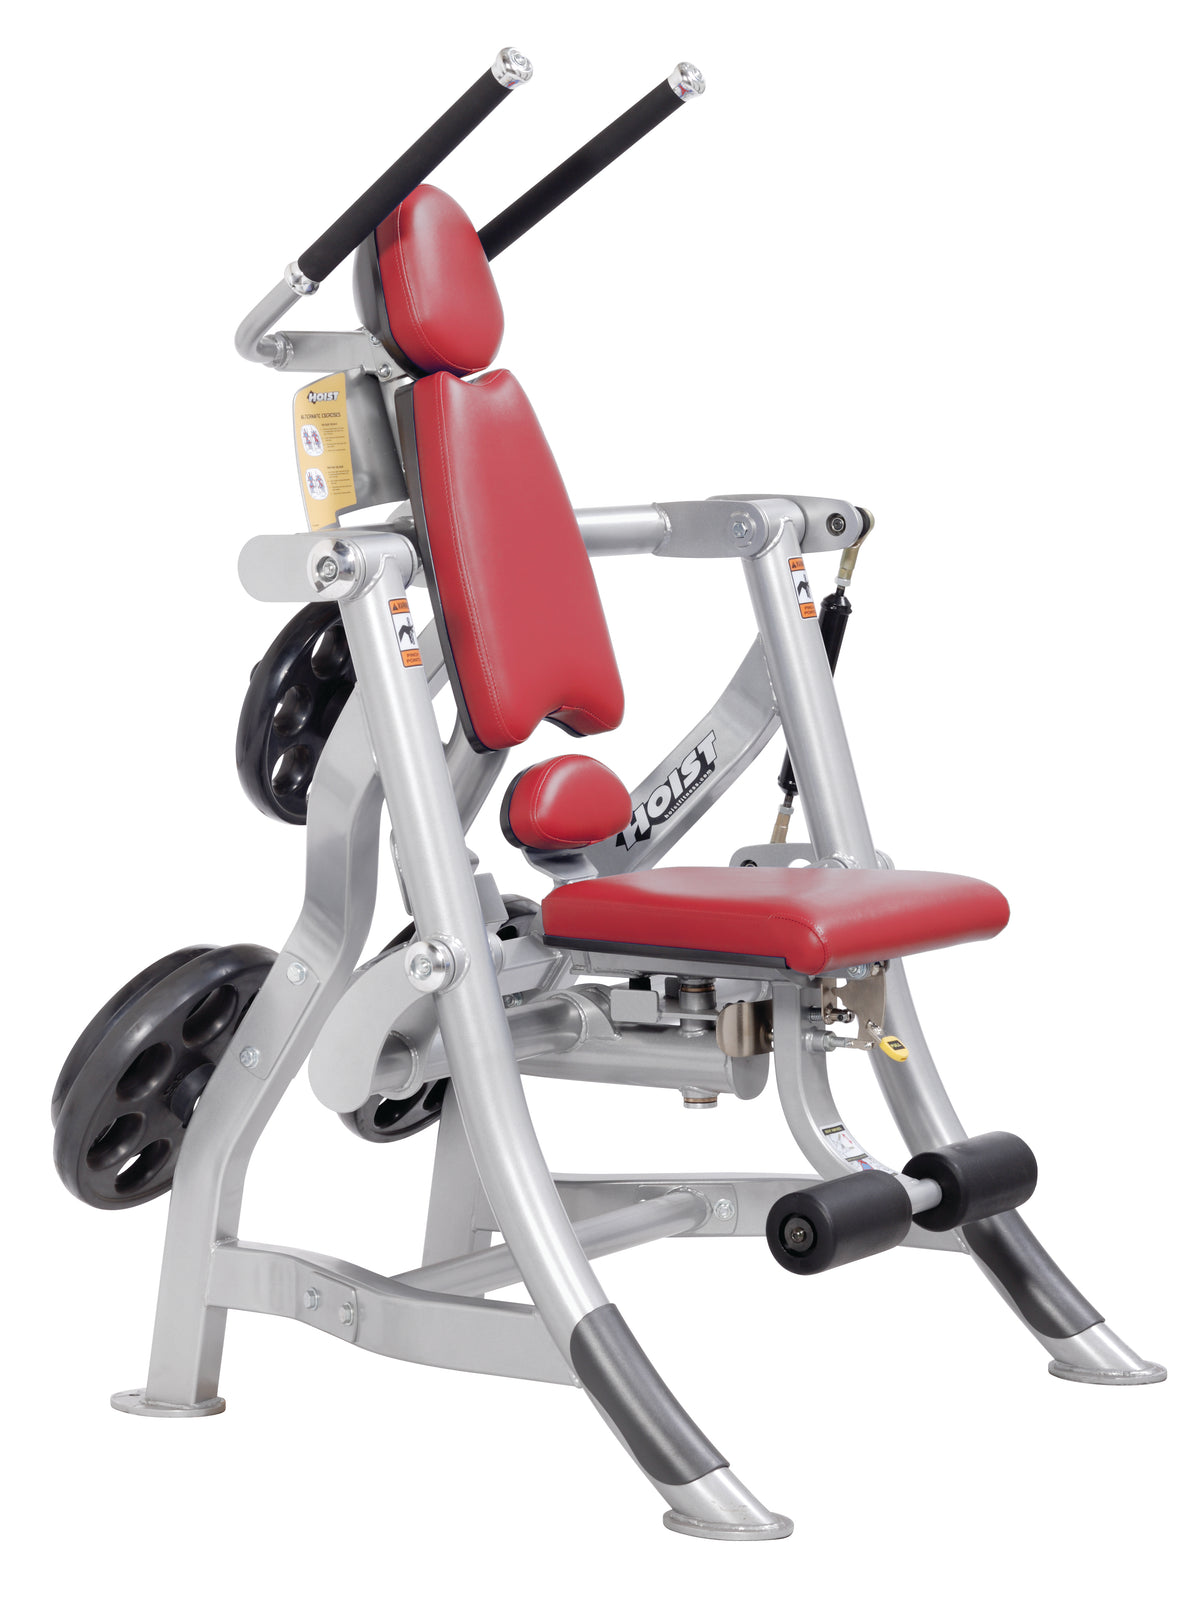 Hoist Fitness RPL-5601 Abdominals with red upholstery | Fitness Experience